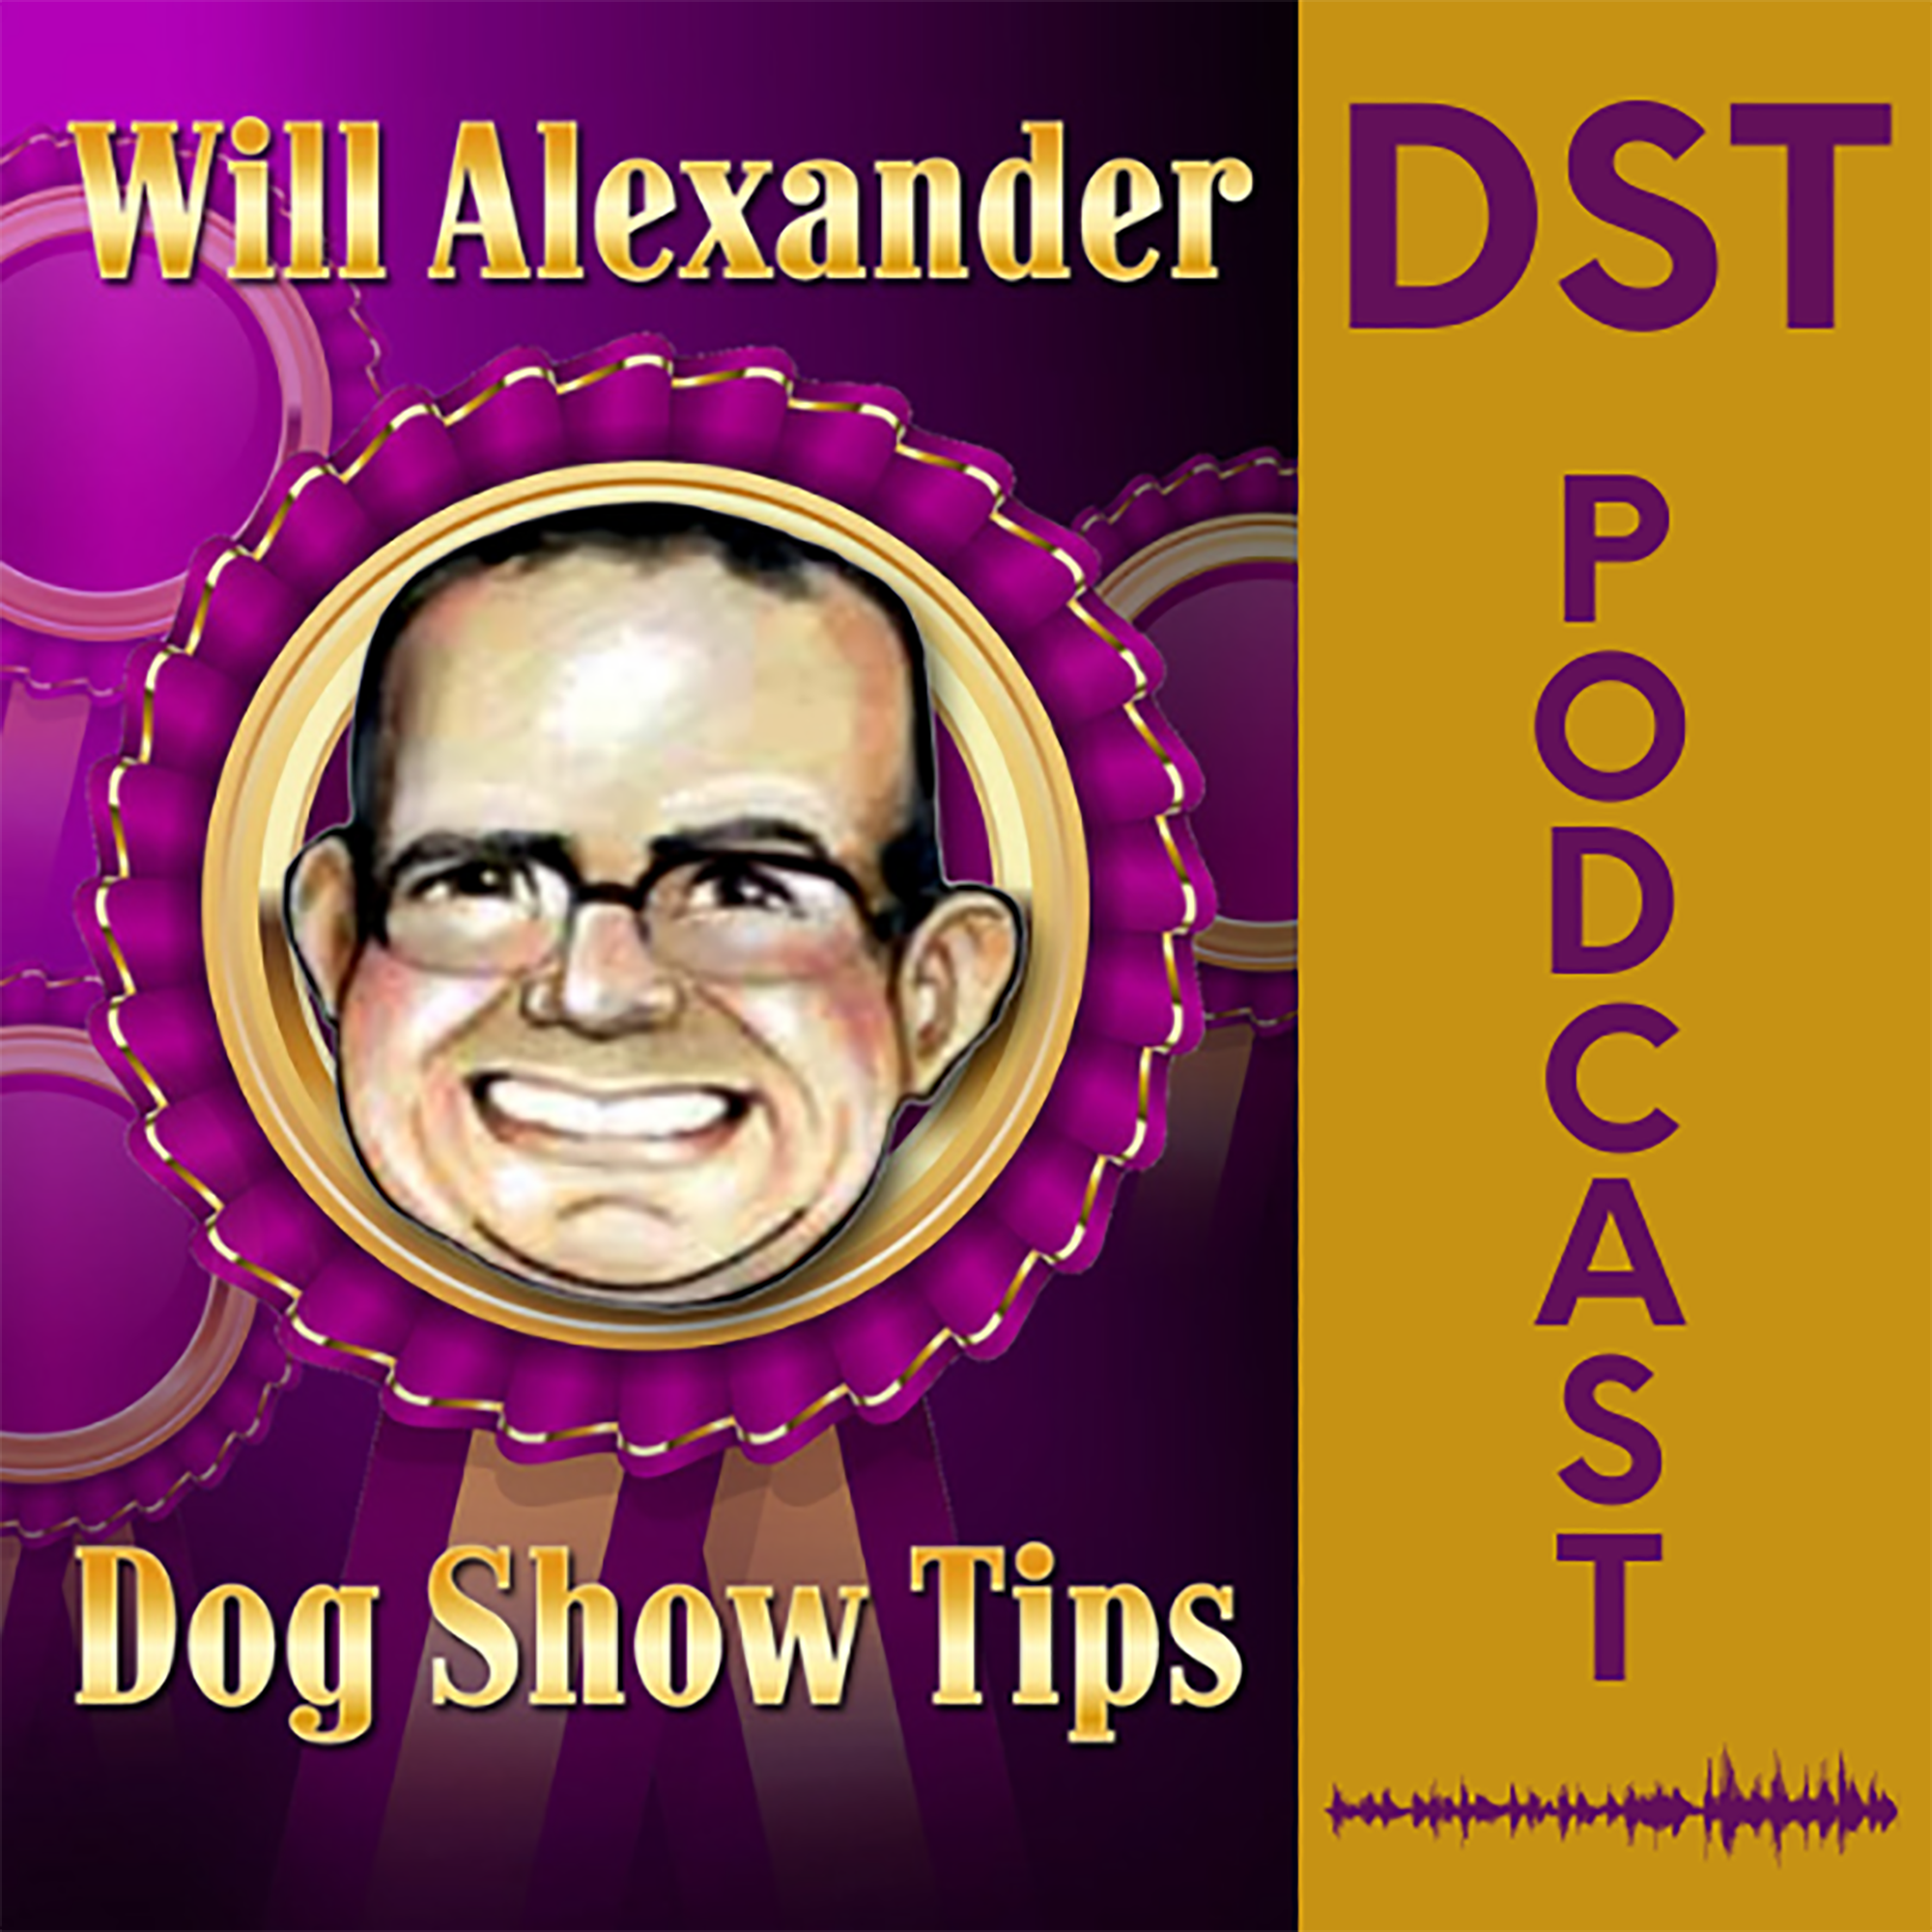 Dog Show Tips - Jay Richardson Interview with Will Alexander